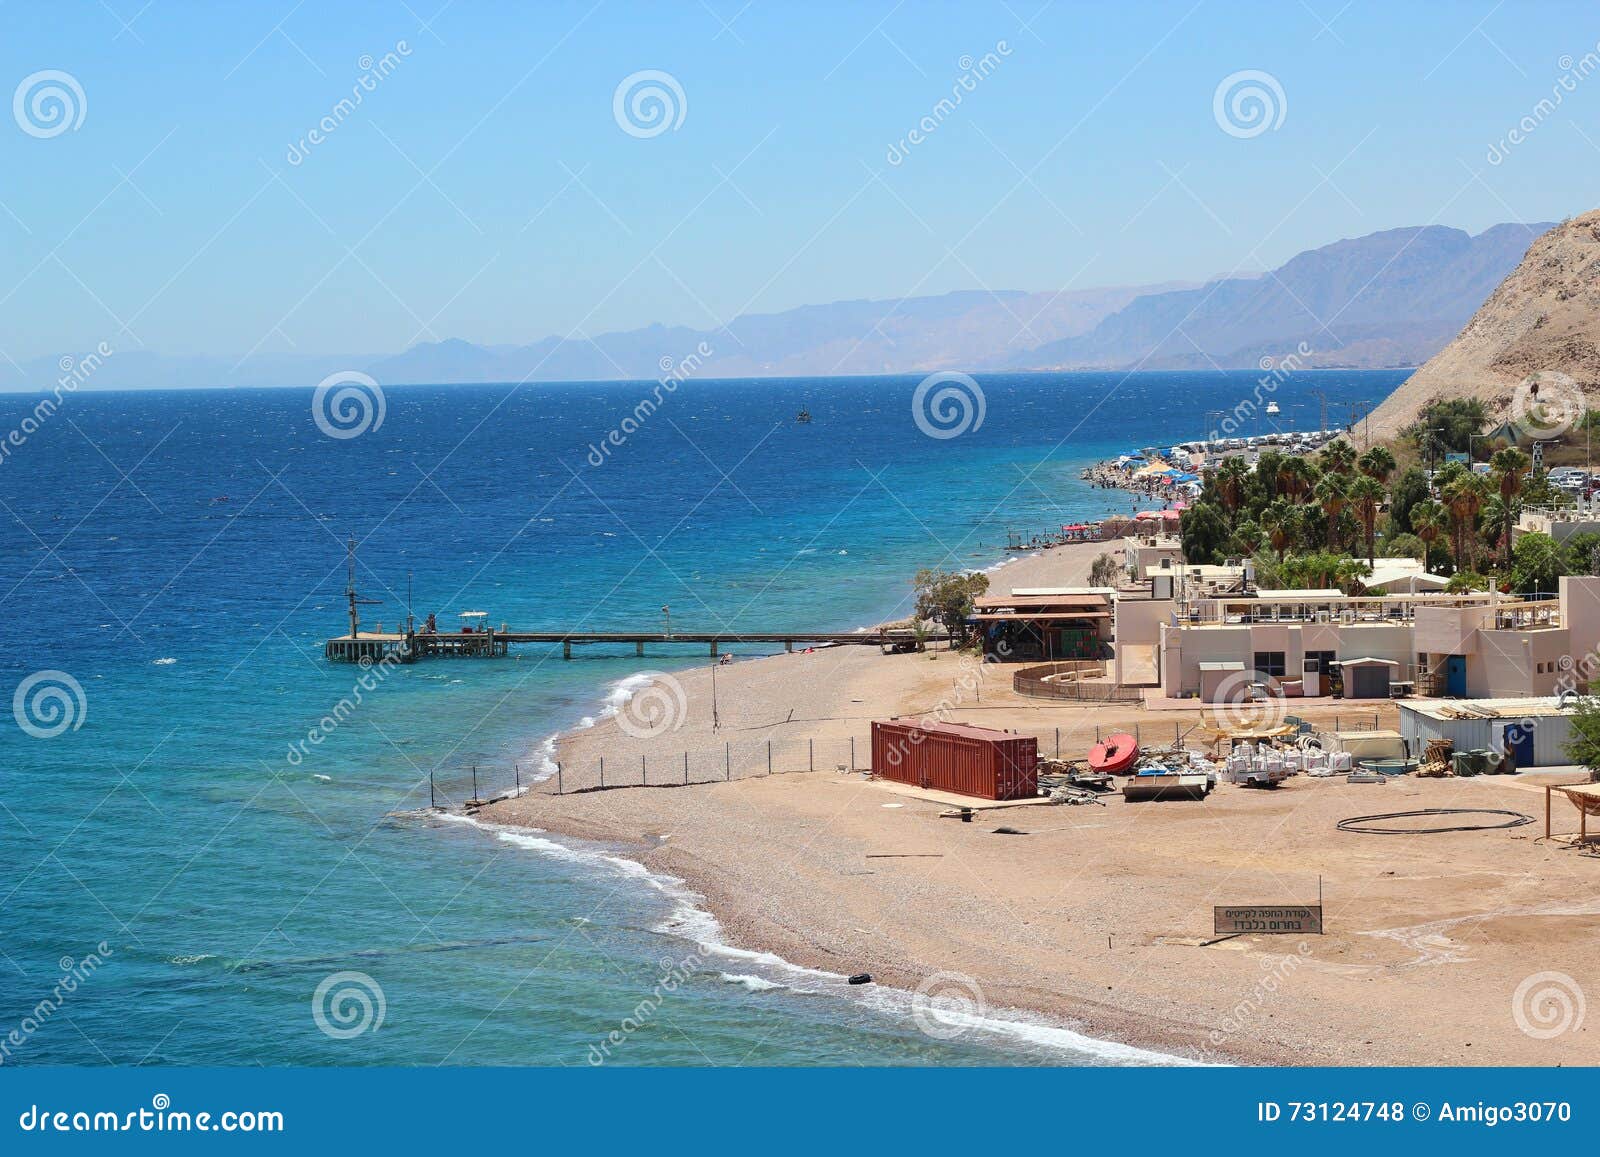 Coral Beach Reserve in Eilat, Stock Photo Image of attraction, 73124748